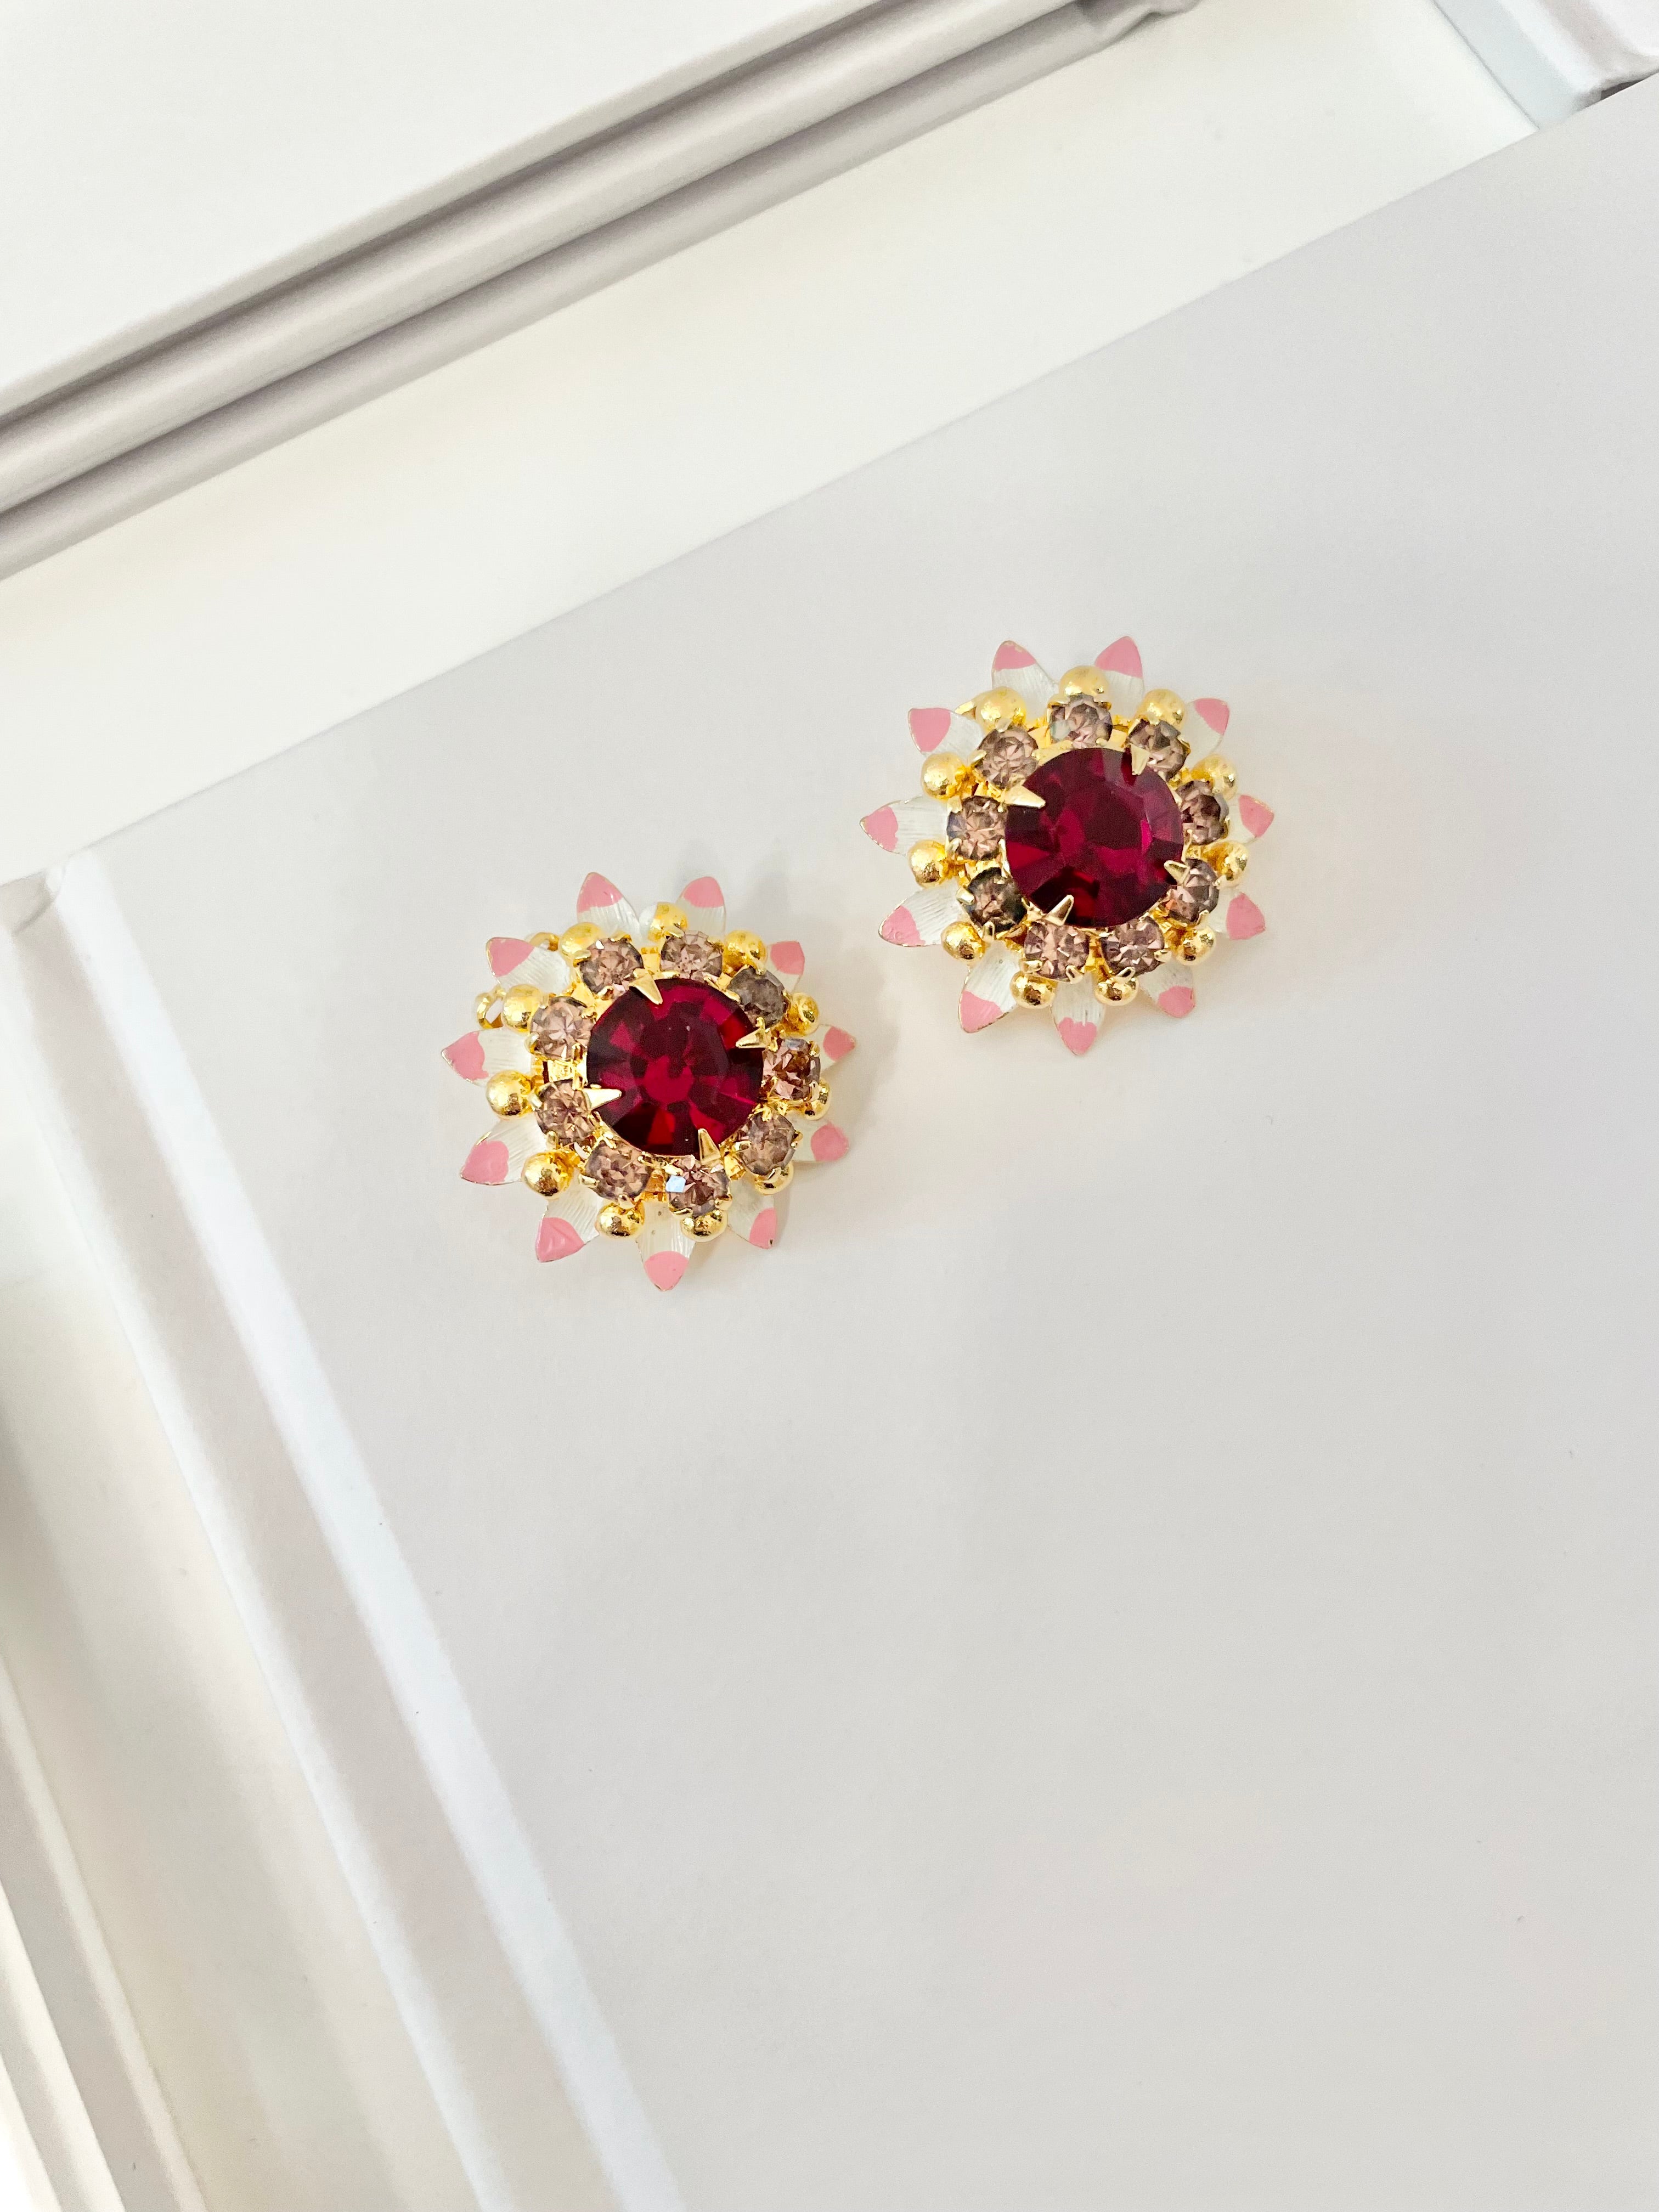 The Flirty gal and her love of all things pink! These 1960's pink flower earrings are truly divine....